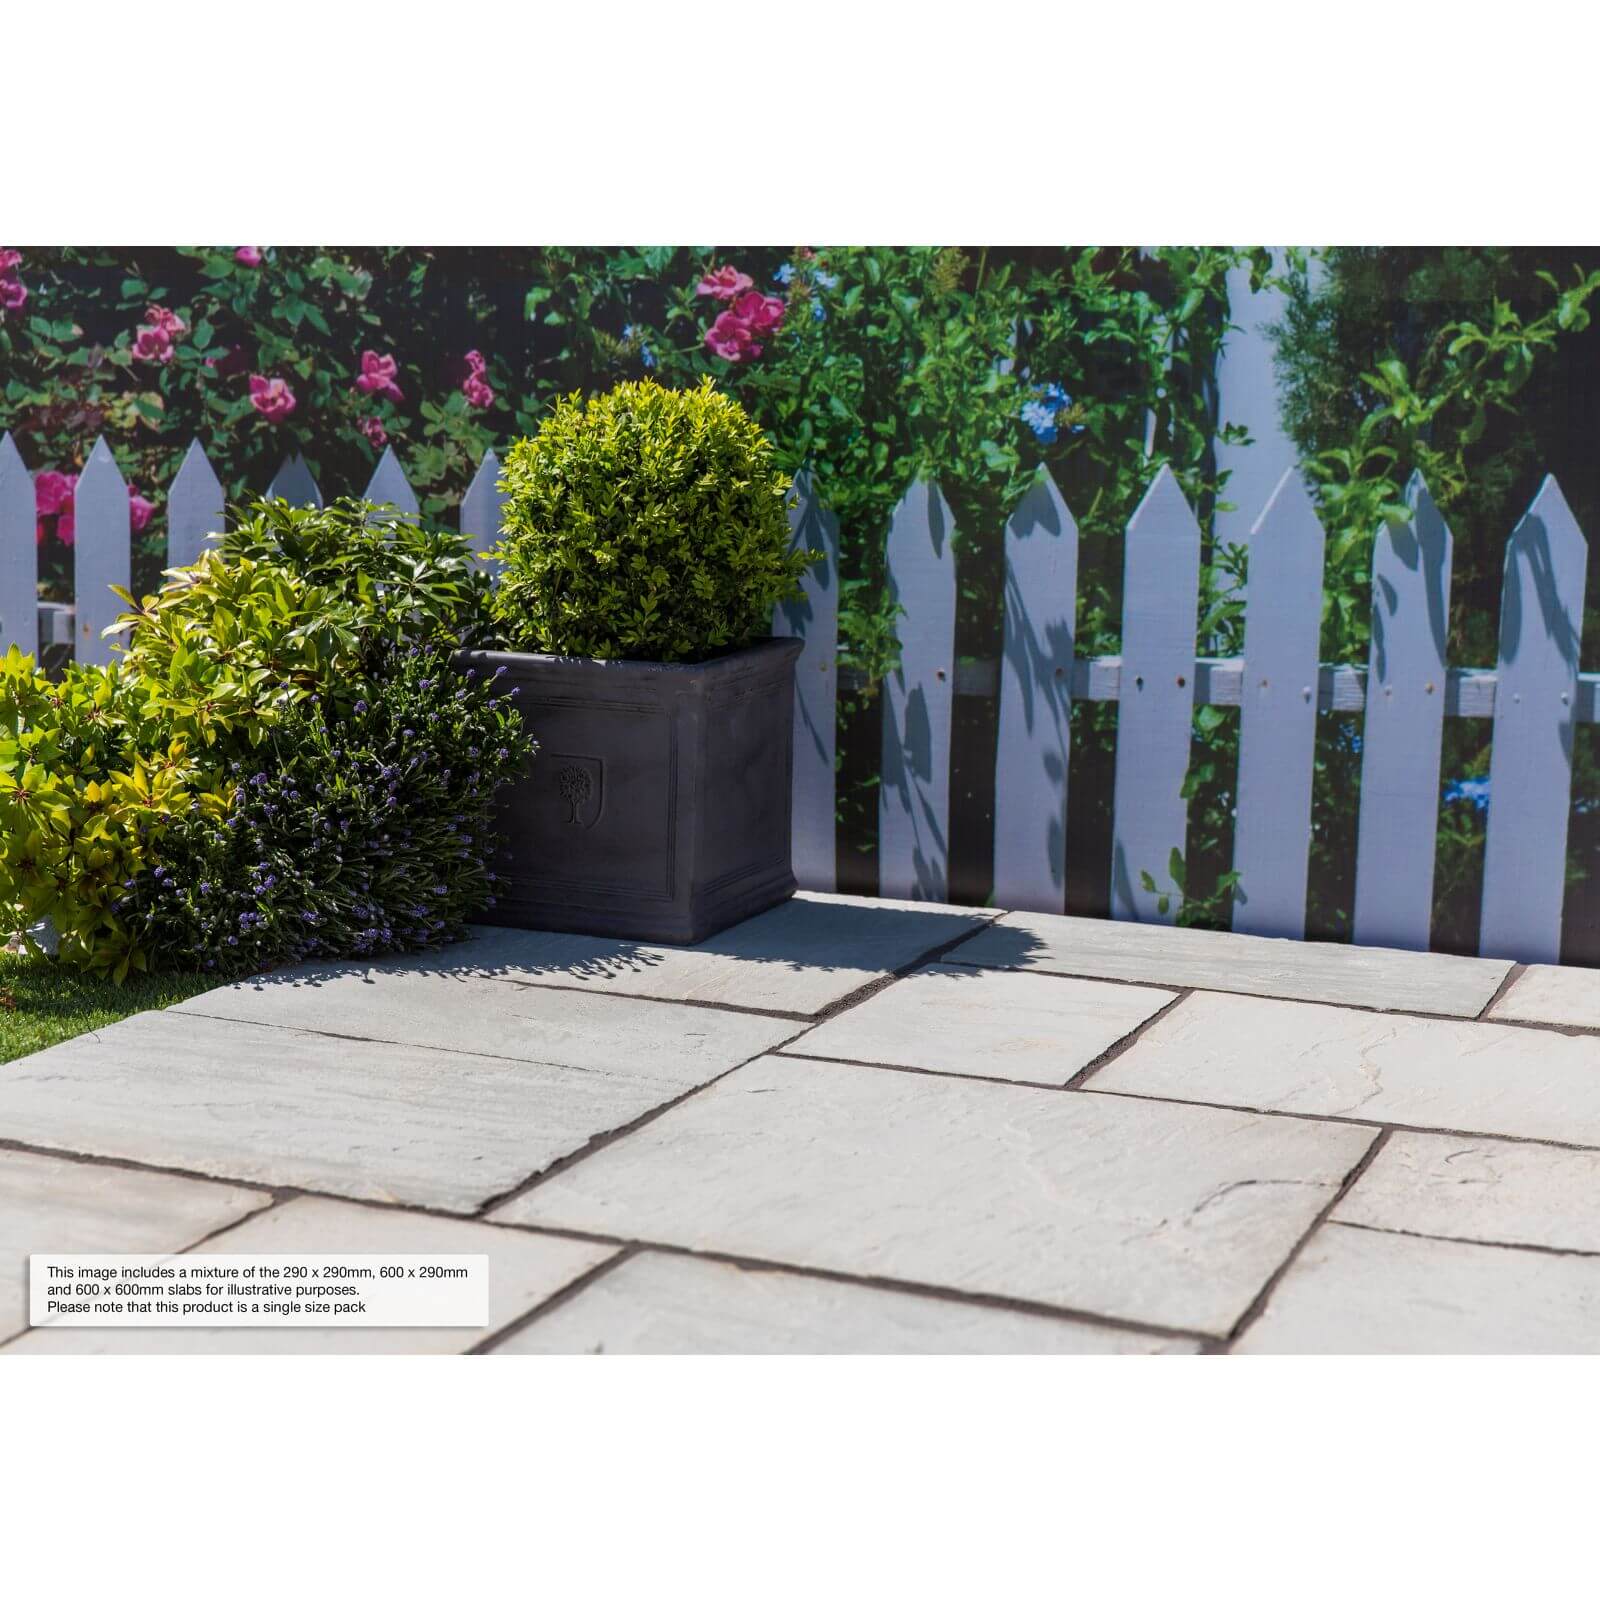 Stylish Stone Natural Sandstone 600 x 600mm Lakefell Full Pack of 42 Slabs